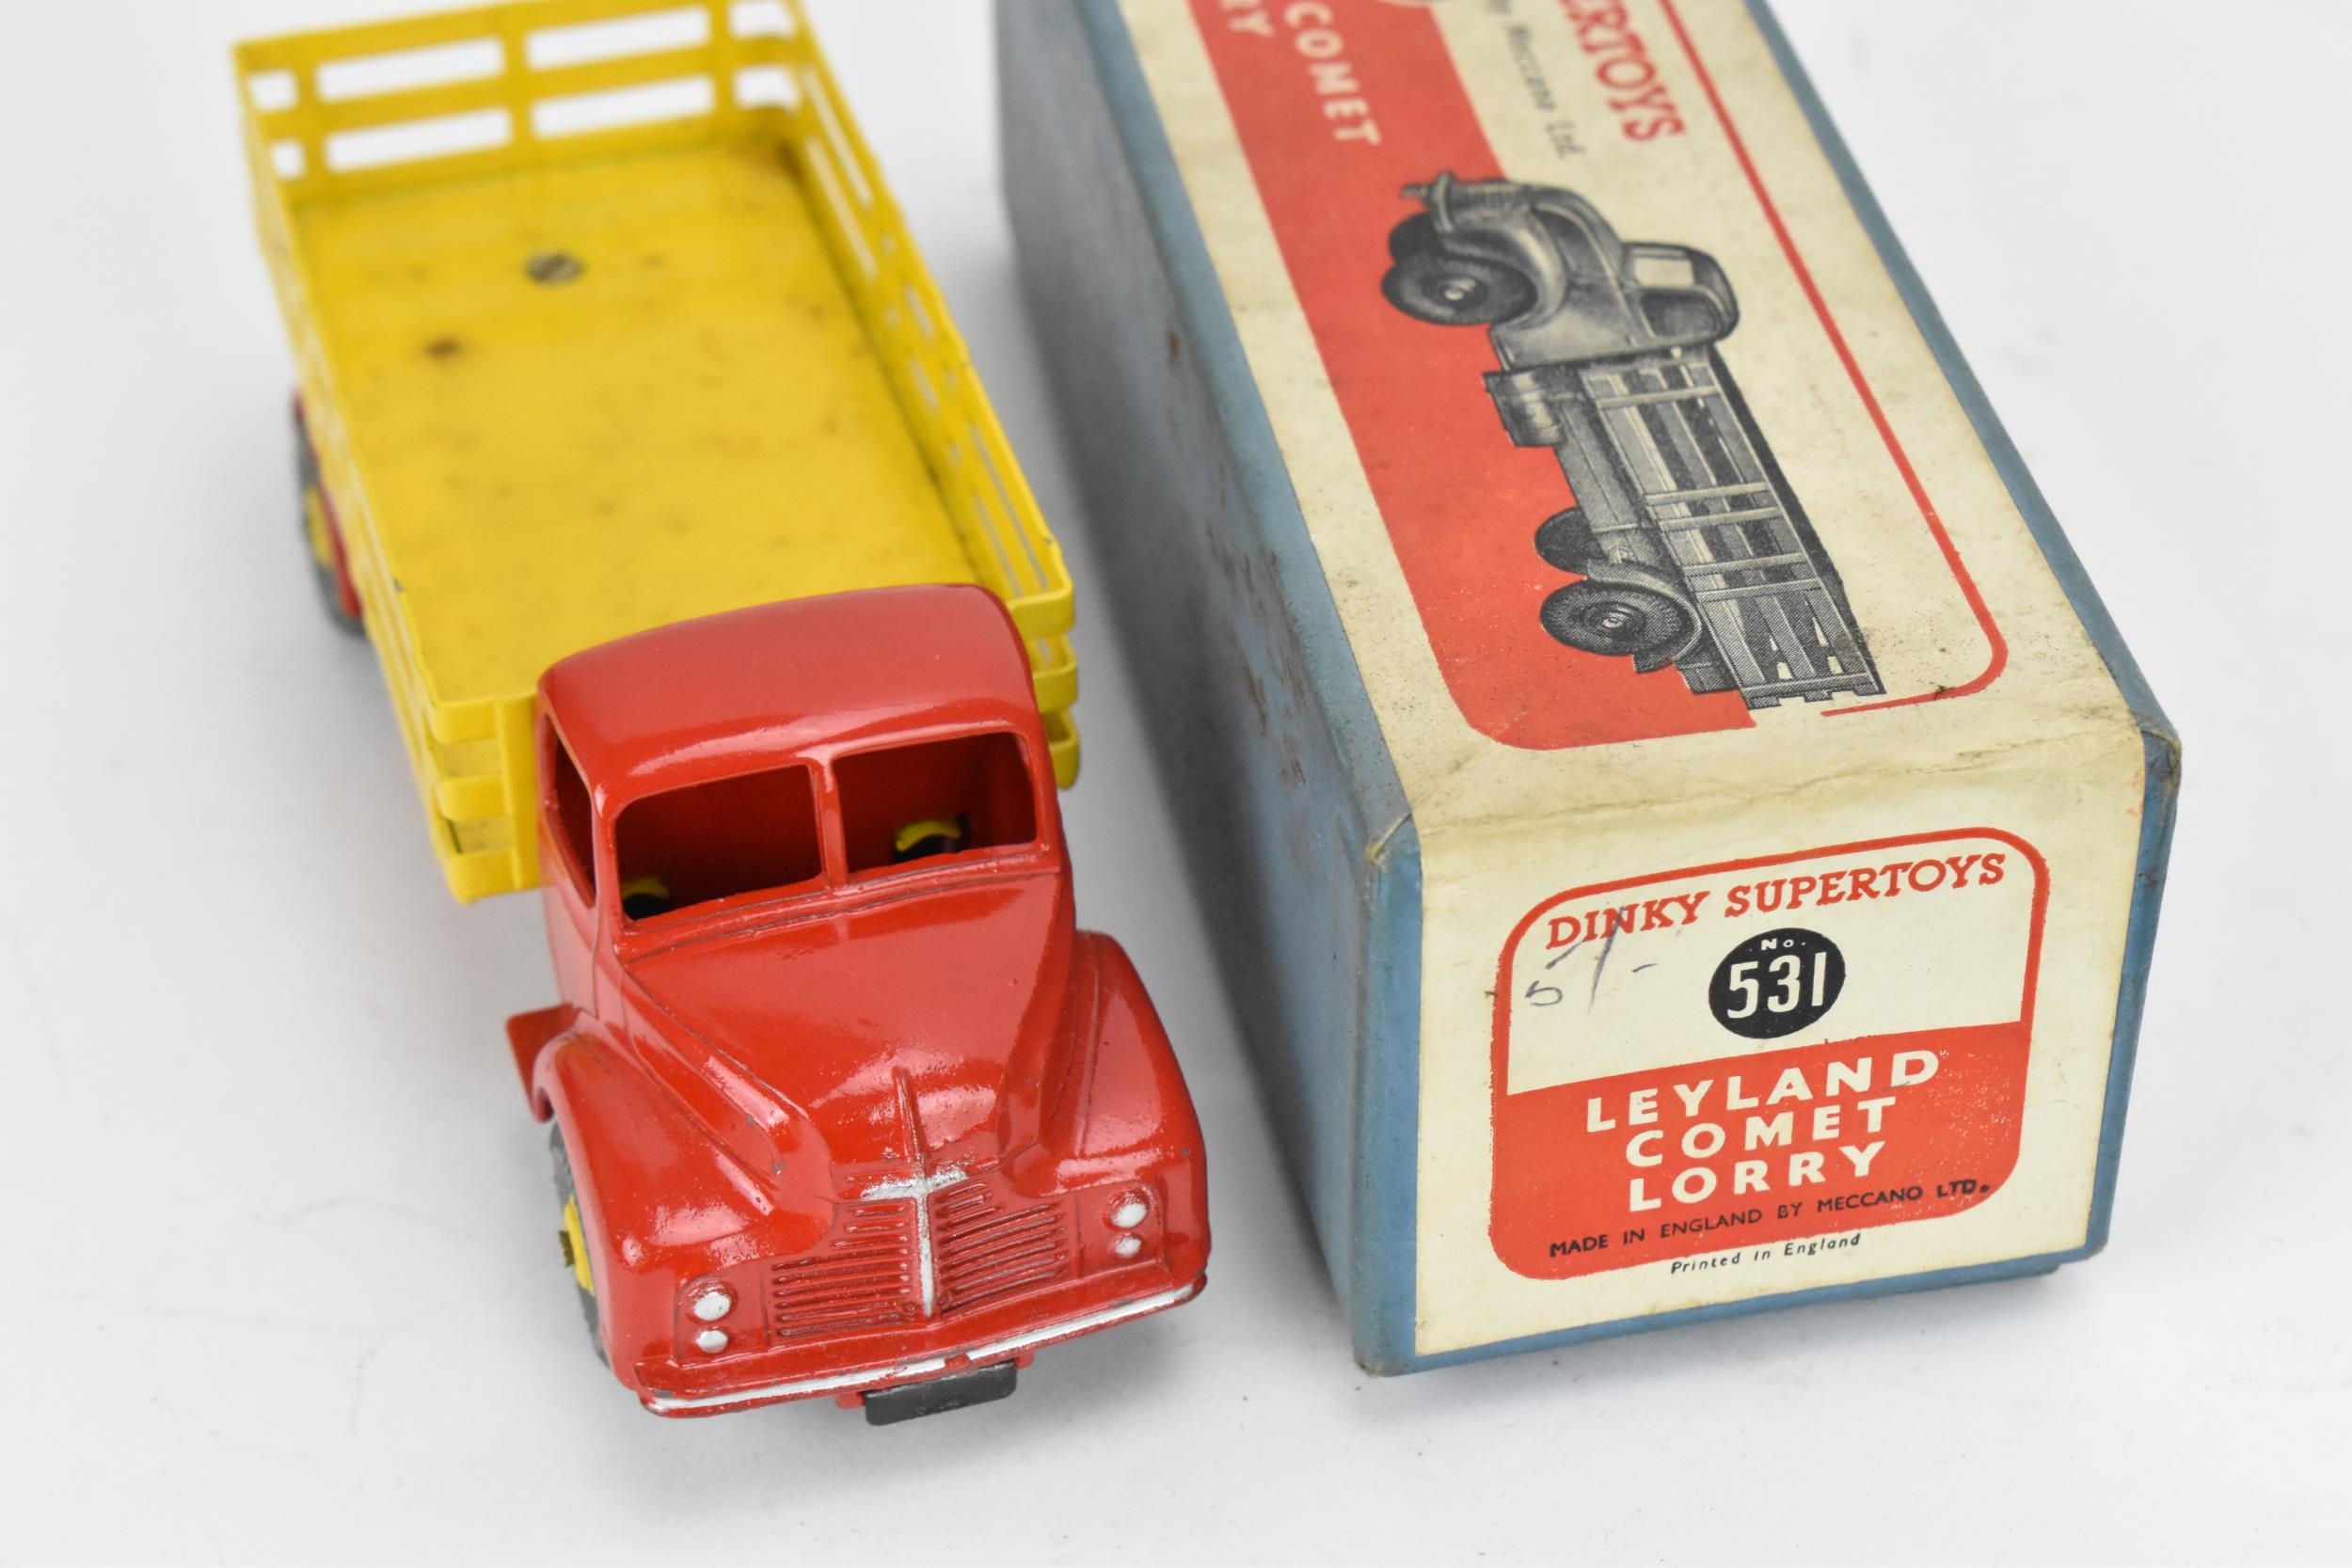 A Dinky Supertoys 531 Leyland Comet Lorry, in yellow and red, in original cardboard box, together - Image 3 of 5